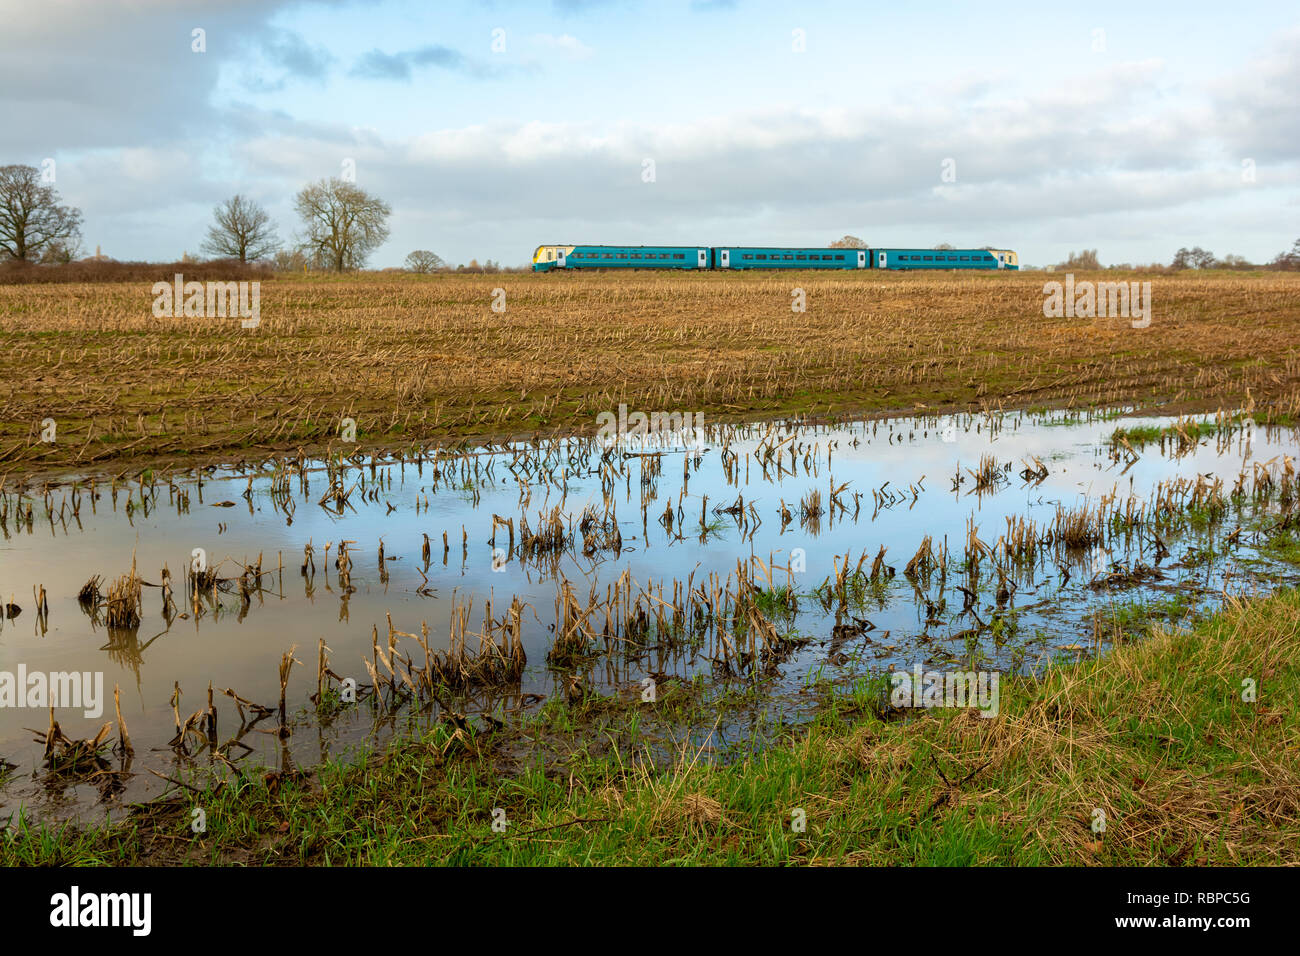 A former Arriva train now operated by Transport for Wales, passes arable farmland under water in winter in the flat Cheshire landscape. Stock Photo